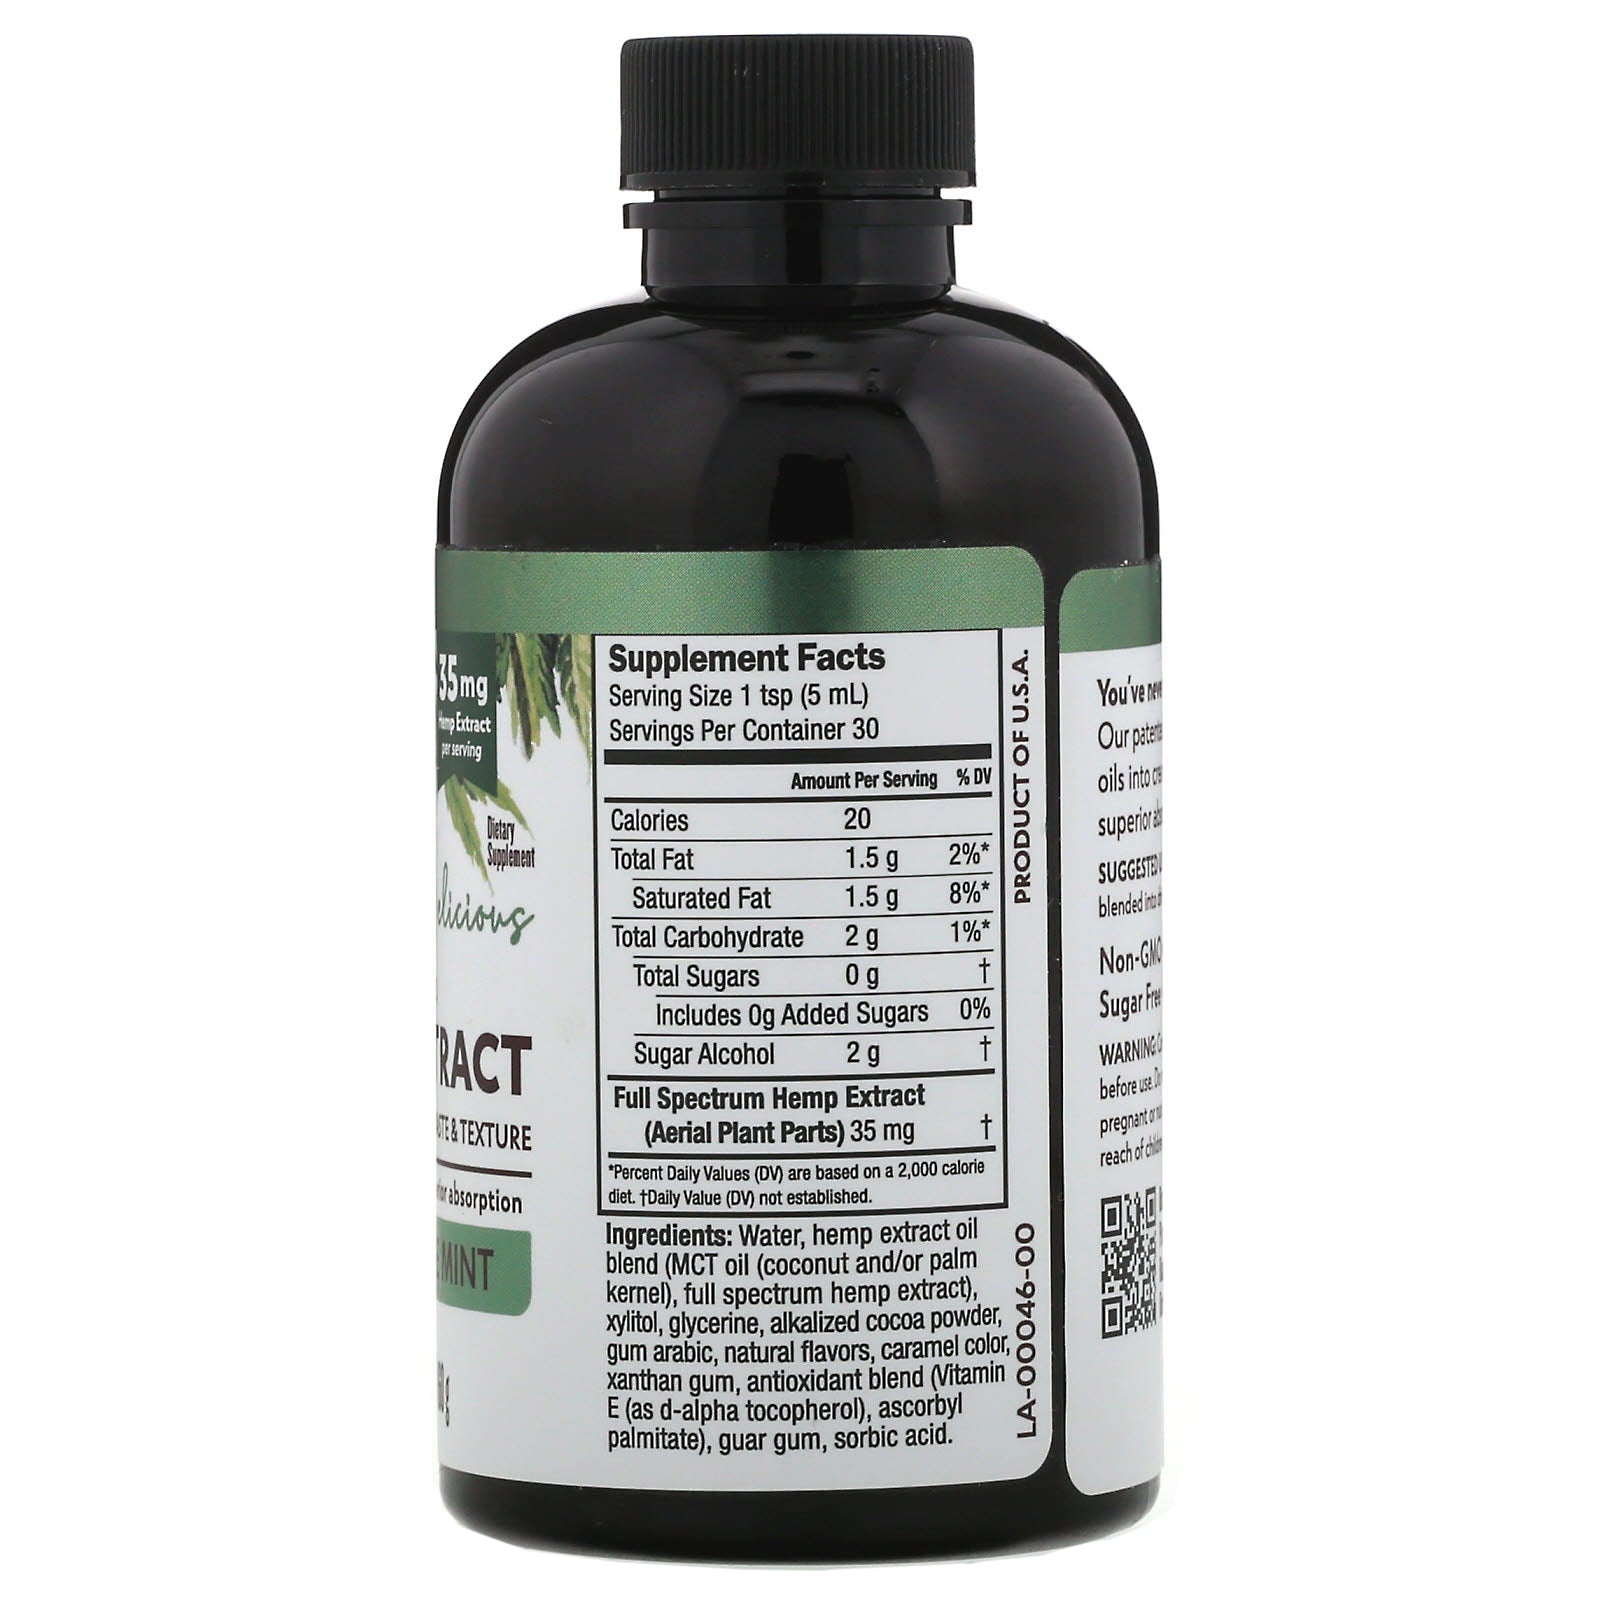 Barlean's, Seriously Delicious Full Spectrum Hemp Extract, Chocolate Mint, 35 mg, 5.7 oz (160 g)